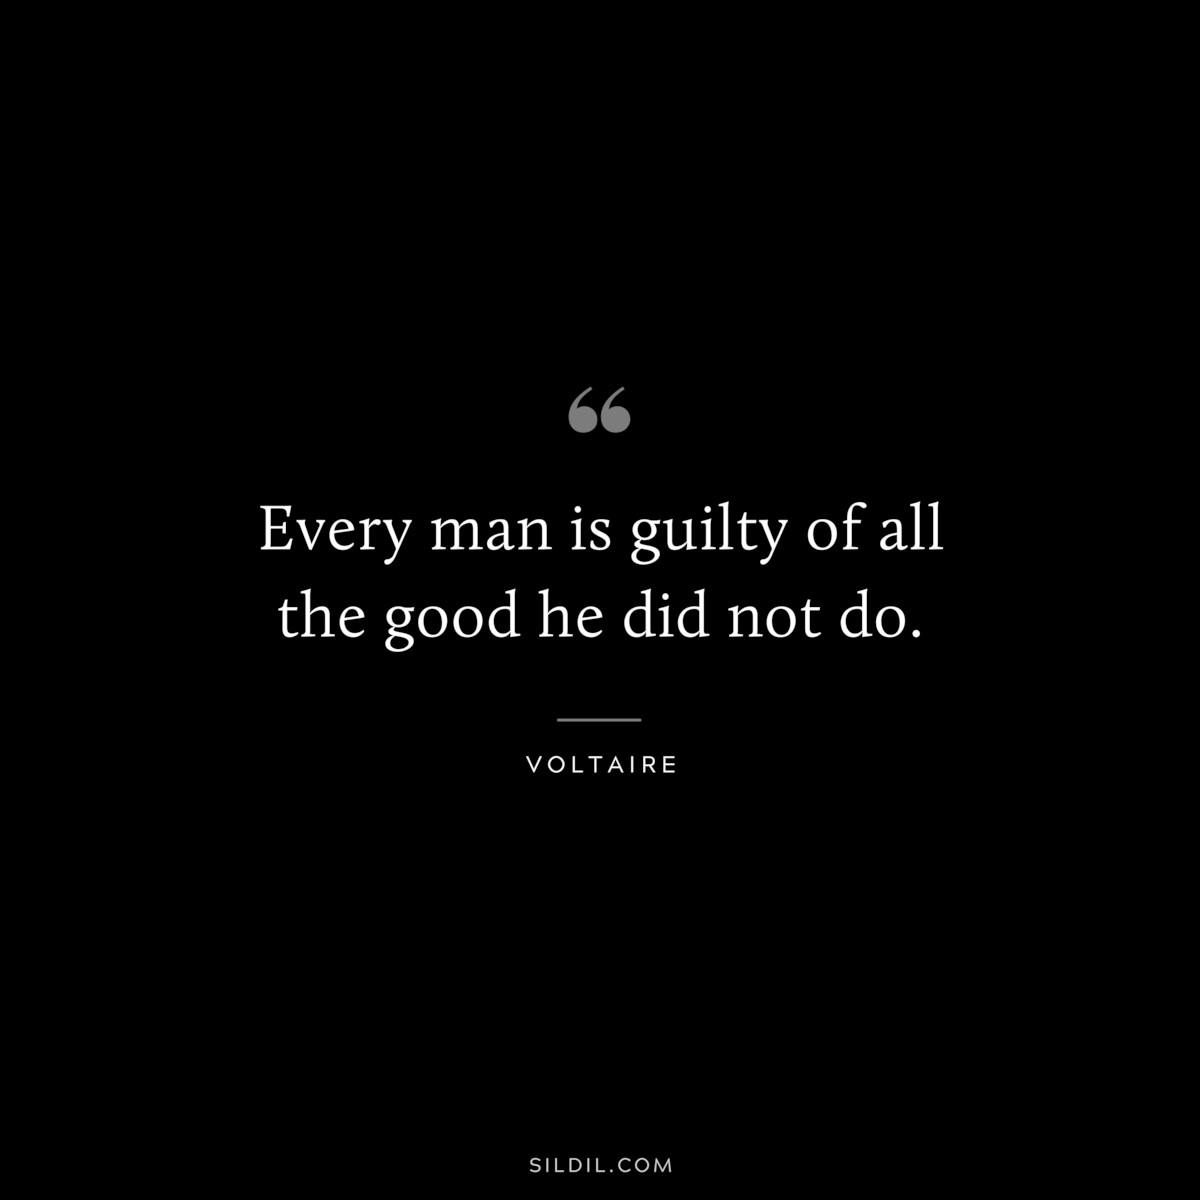 Every man is guilty of all the good he did not do. ― Voltaire